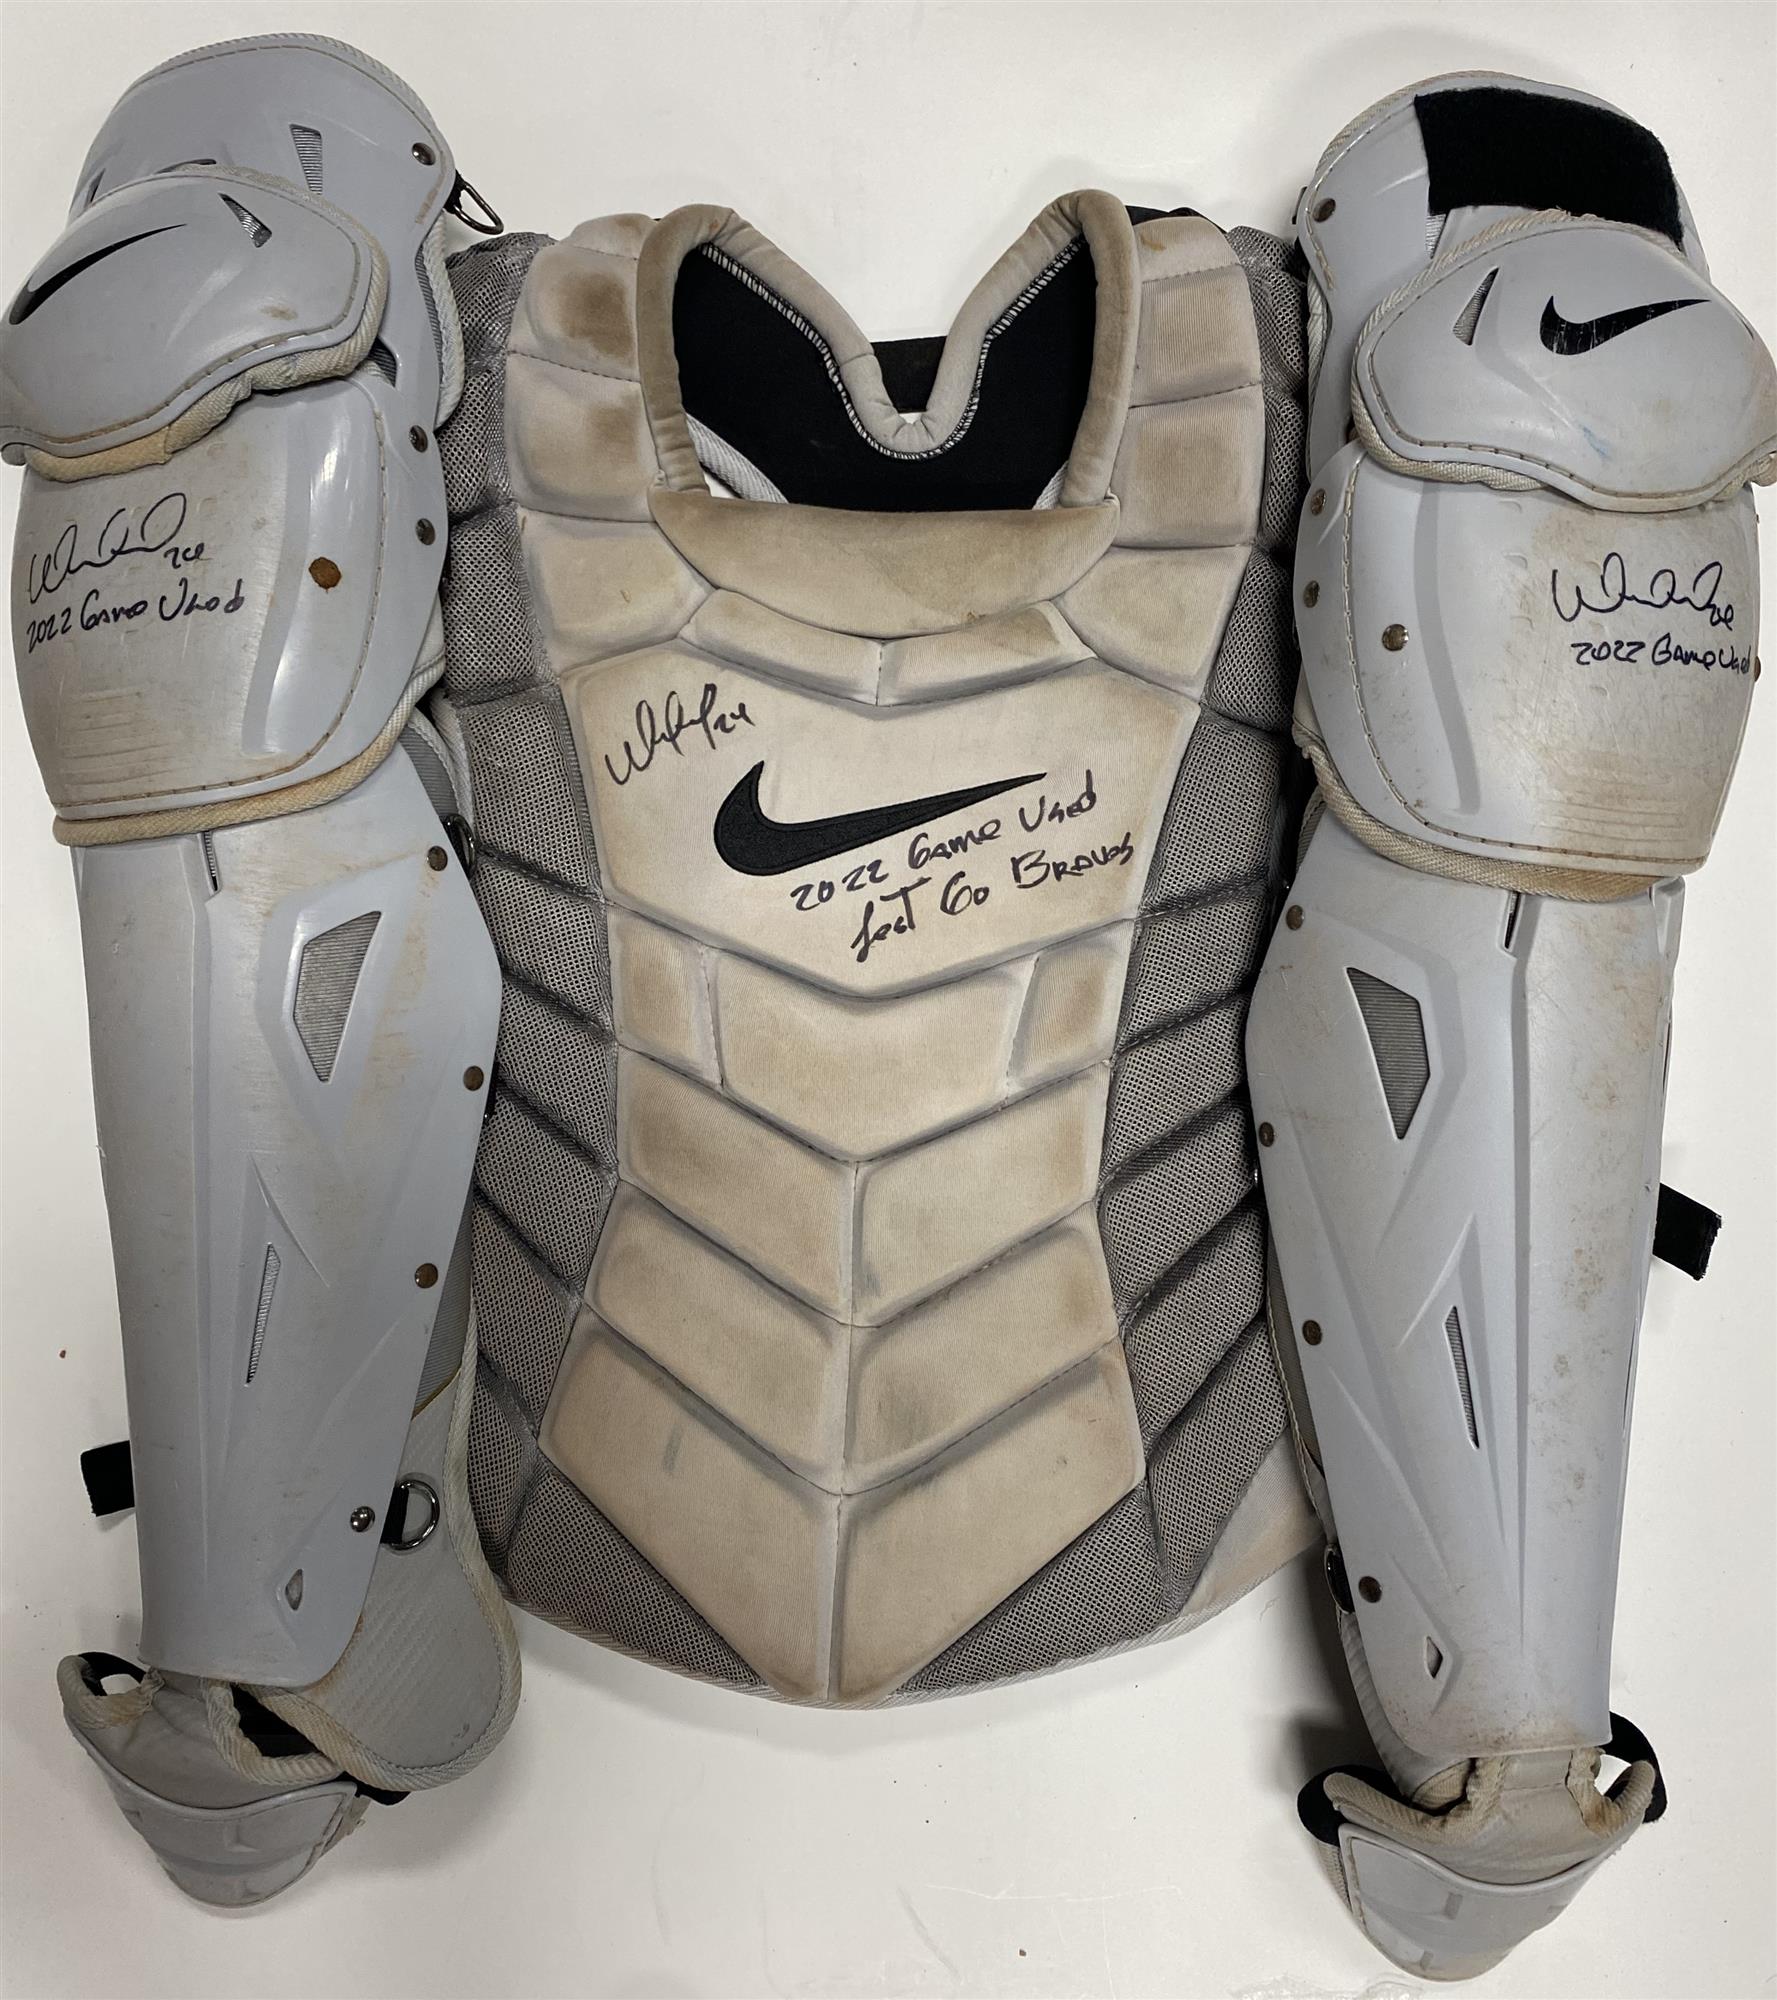 WILLIAM CONTRERAS SIGNED BRAVES 2022 GAME USED CATCHERS GEAR #2 - JSA